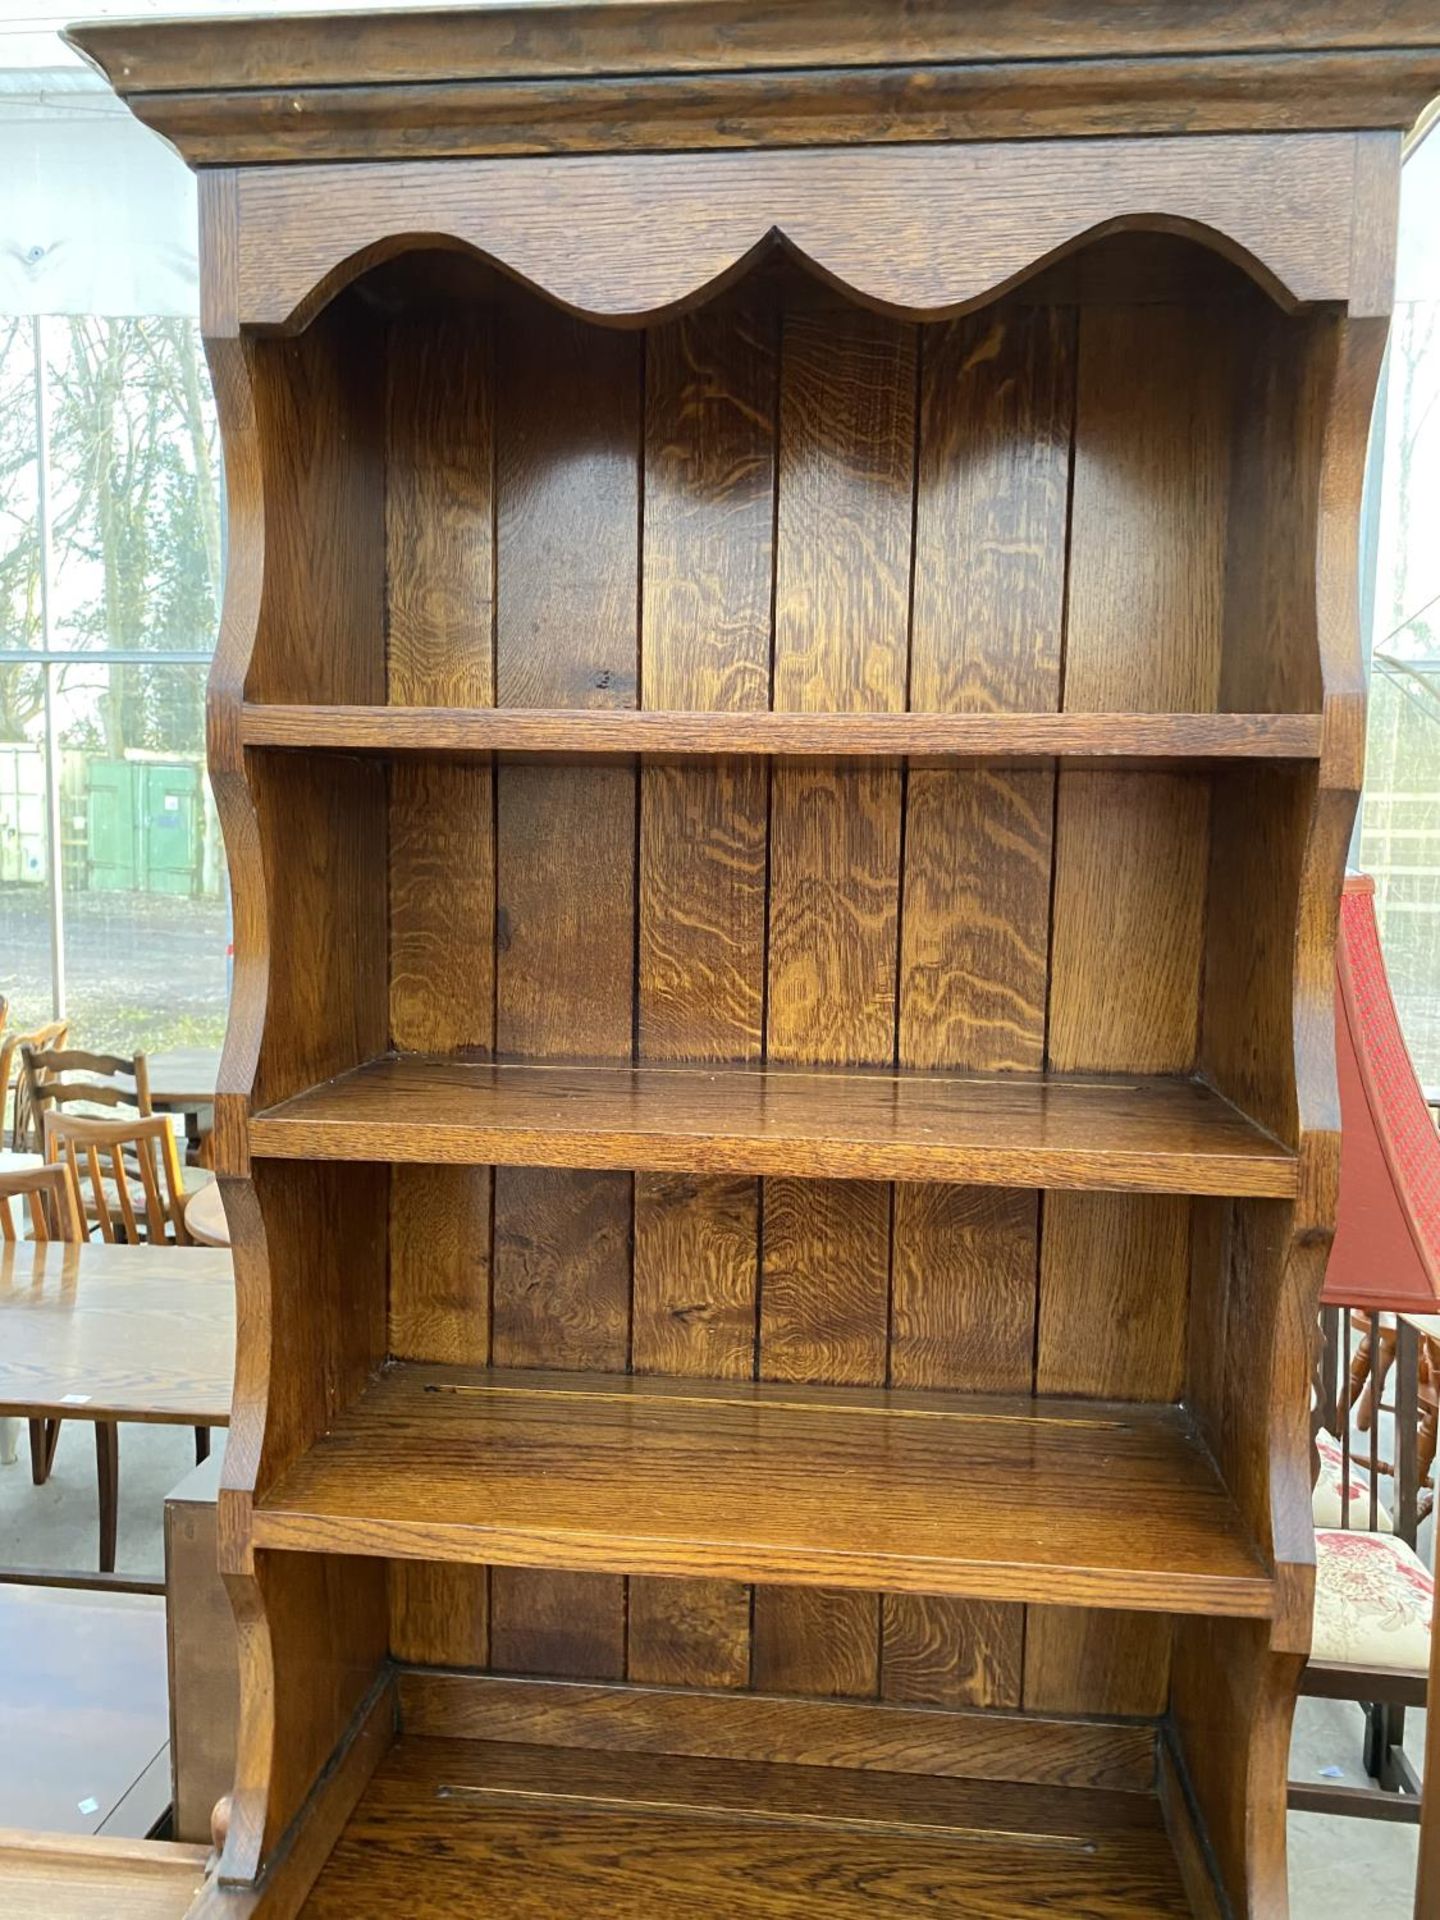 A TALL NARROW OAK DRESSER WITH TWO DOORS, TWO DOORS AND UPPER PLATE RACK - Image 2 of 4